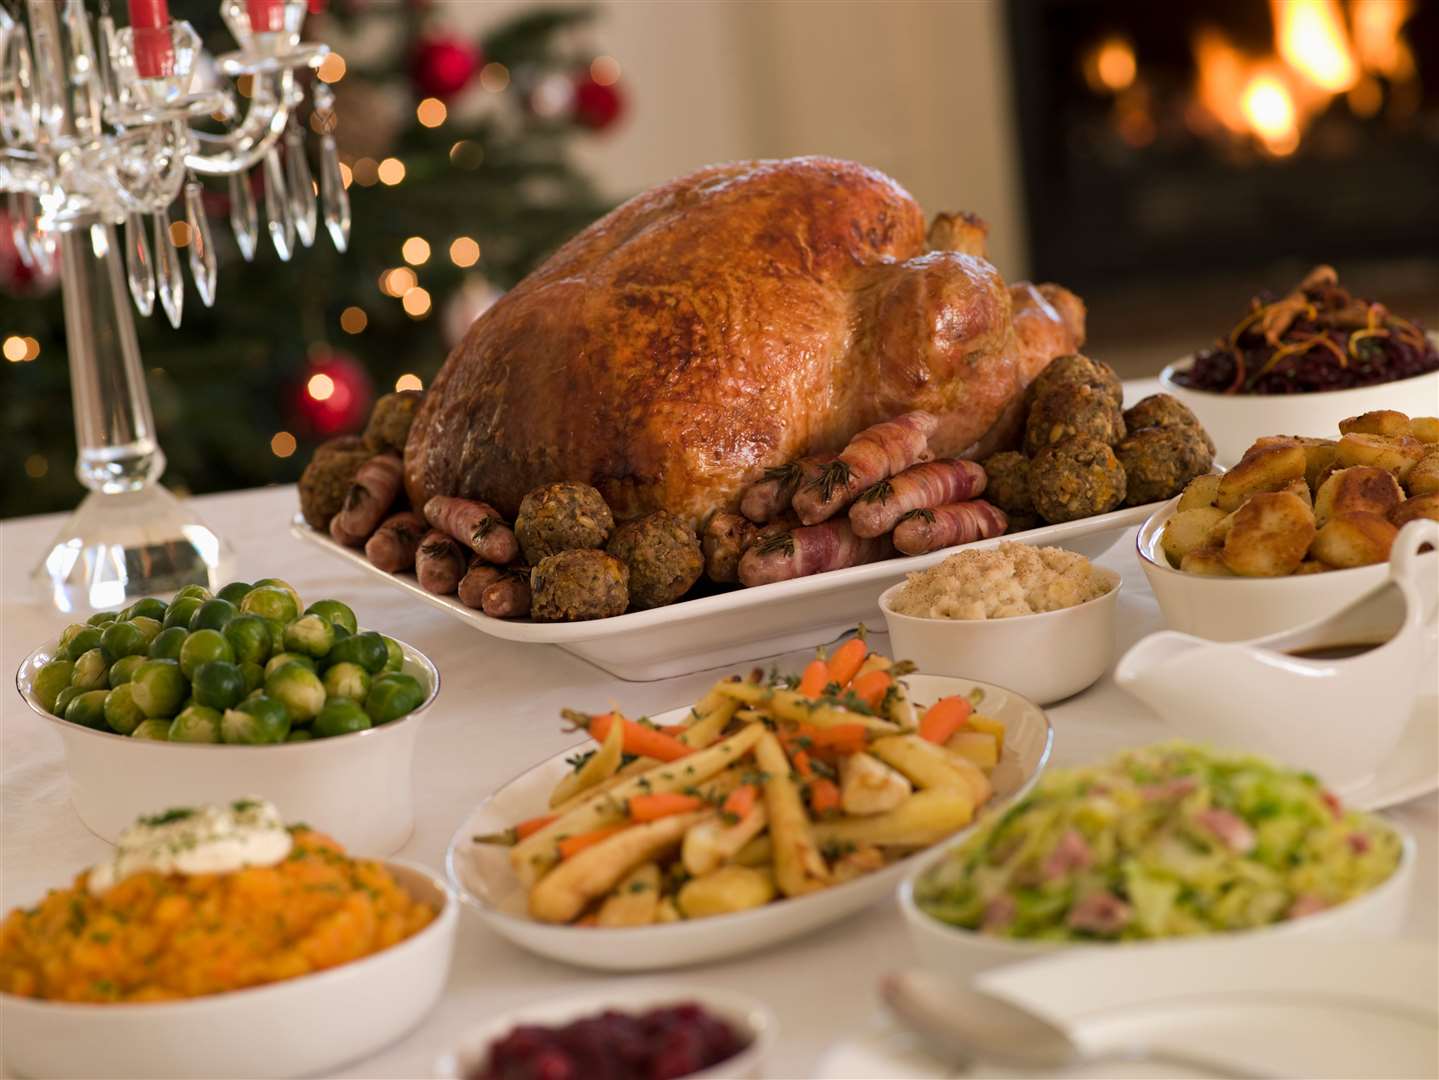 A traditional Christmas dinner is on offer from the Kyle of Sutherland Development Trust Christmas larders.